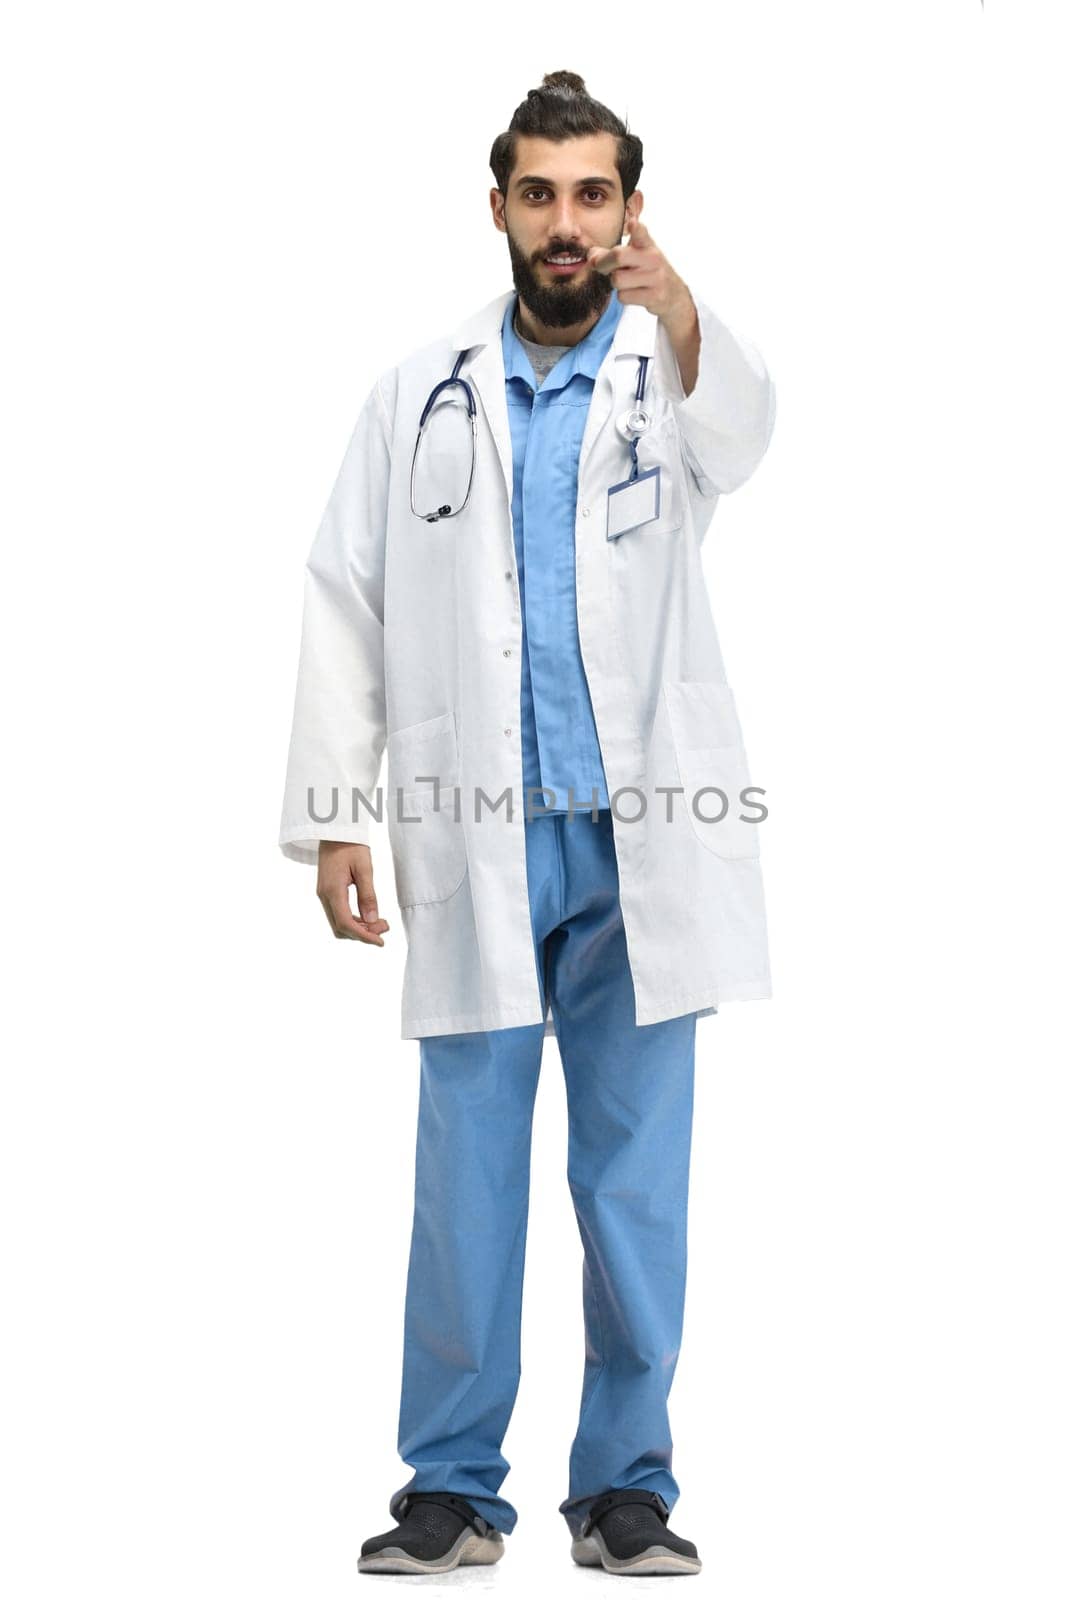 The male doctor, full-length, on a white background, points forward.